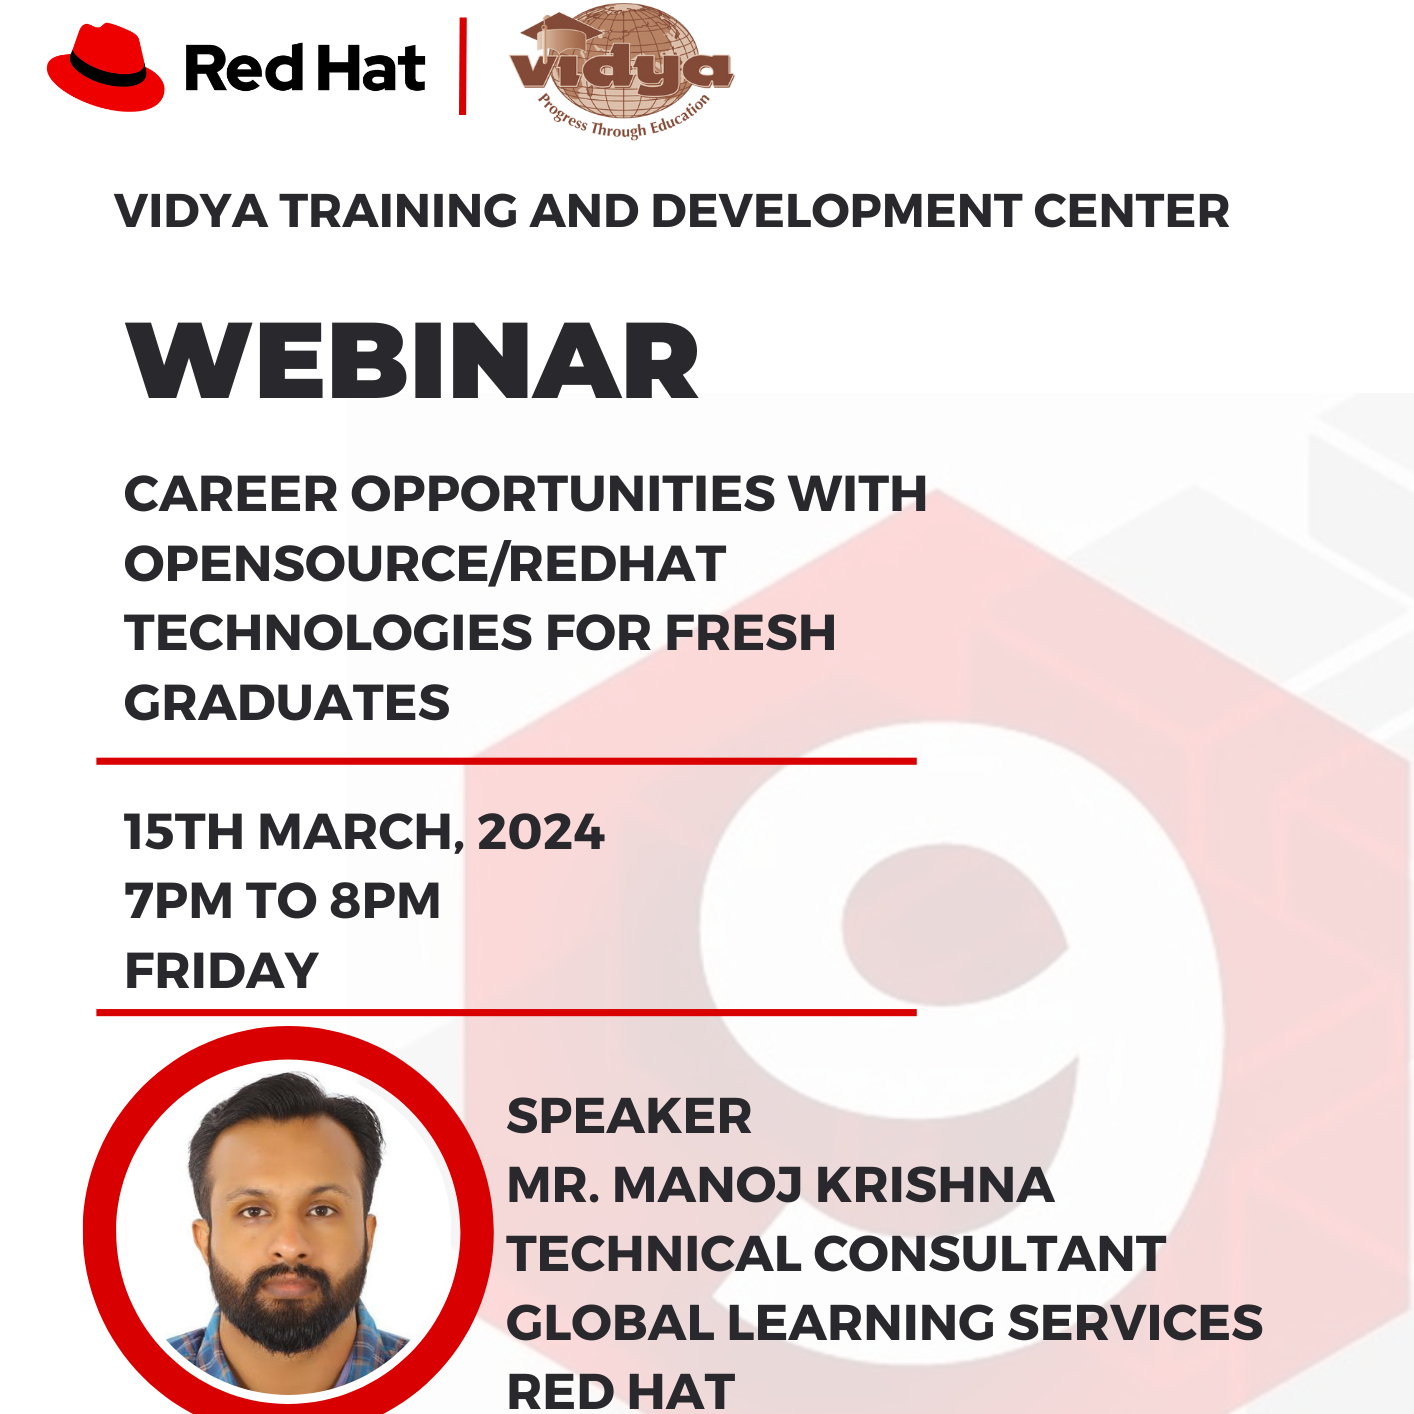 Poster for RedHat Webinar on 15th March, 2024